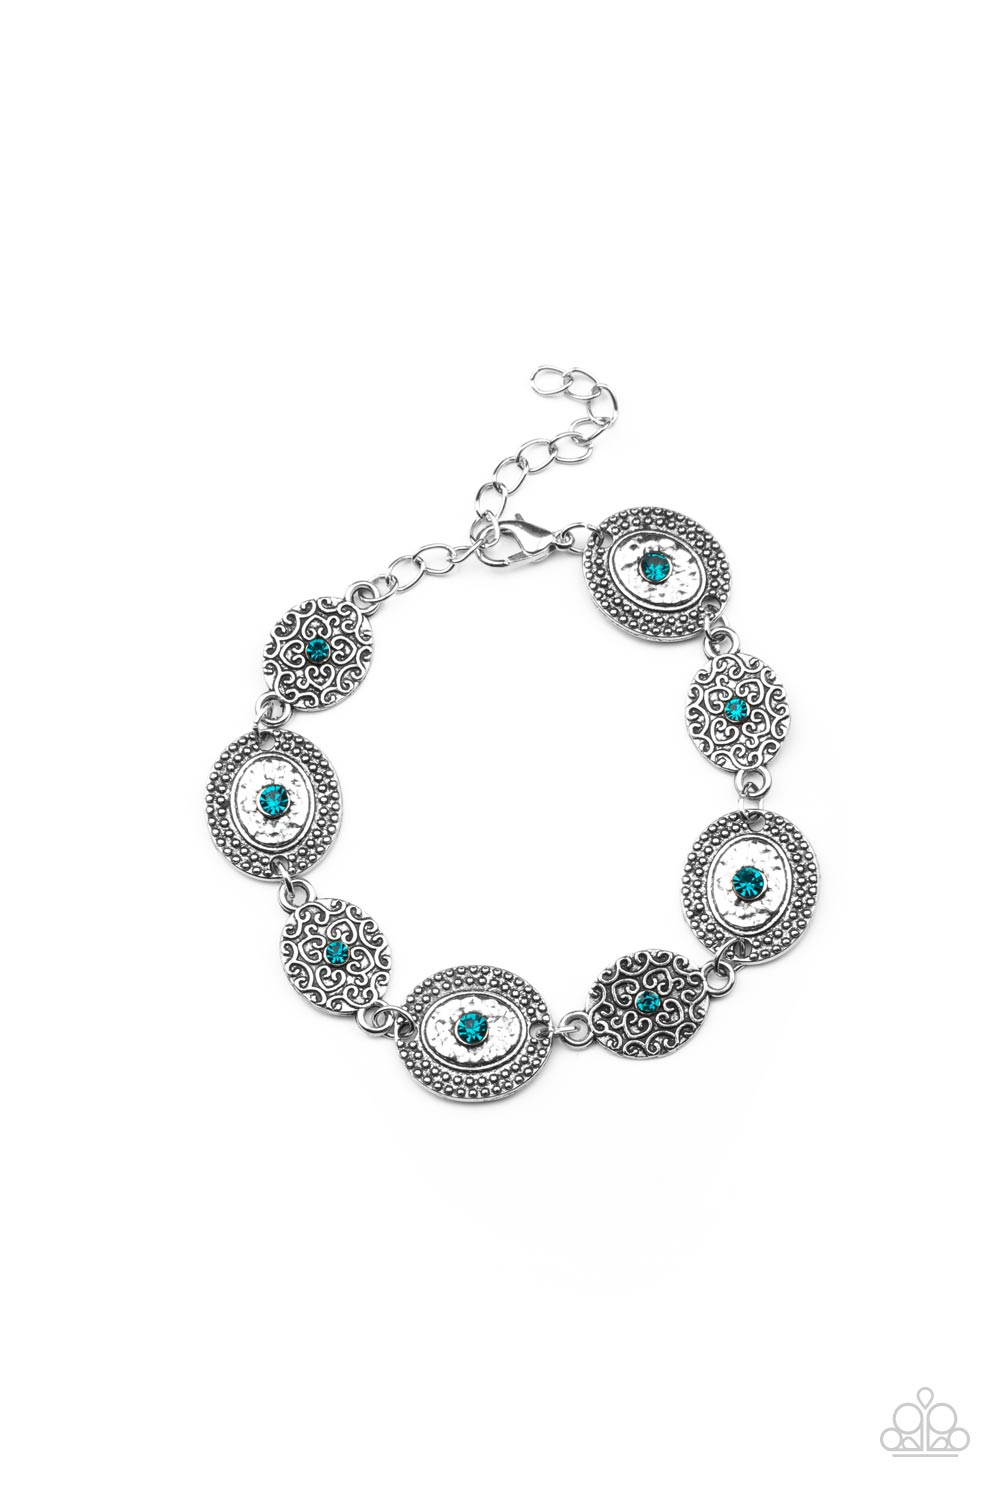 Paparazzi - SECRET GARDEN GLAMOUR - BLUE - Delicate Blue Zircon rhinestones dot the centers of engraved antiqued silver discs. The dotted textures and heart-shaped vines create a charming impression as they gracefully link around the wrist. Features an adjustable clasp closure.